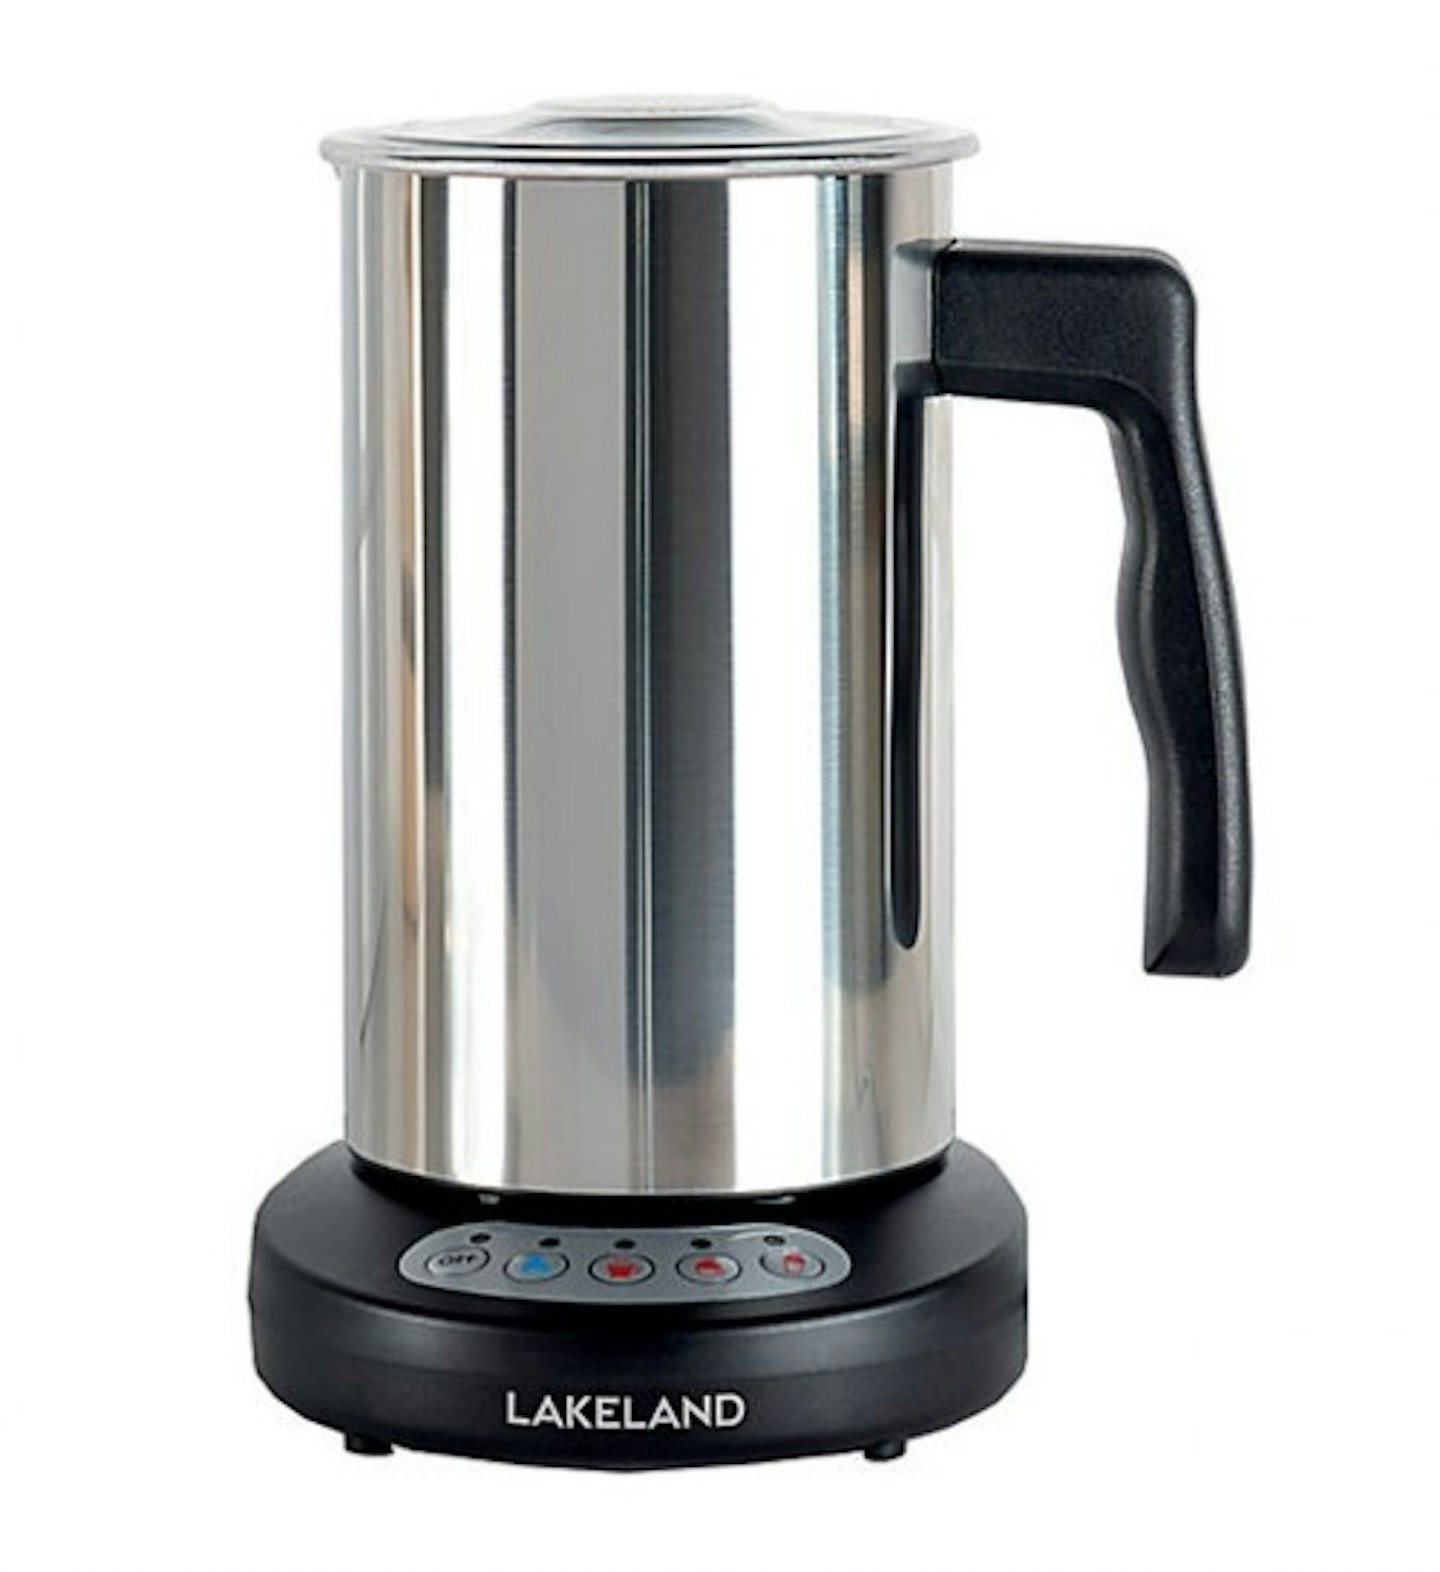 https://images.bauerhosting.com/affiliates/sites/10/2022/12/Lakeland-Milk-Frother-and-Hot-Chocolate-Maker.jpg?auto=format&w=1440&q=80